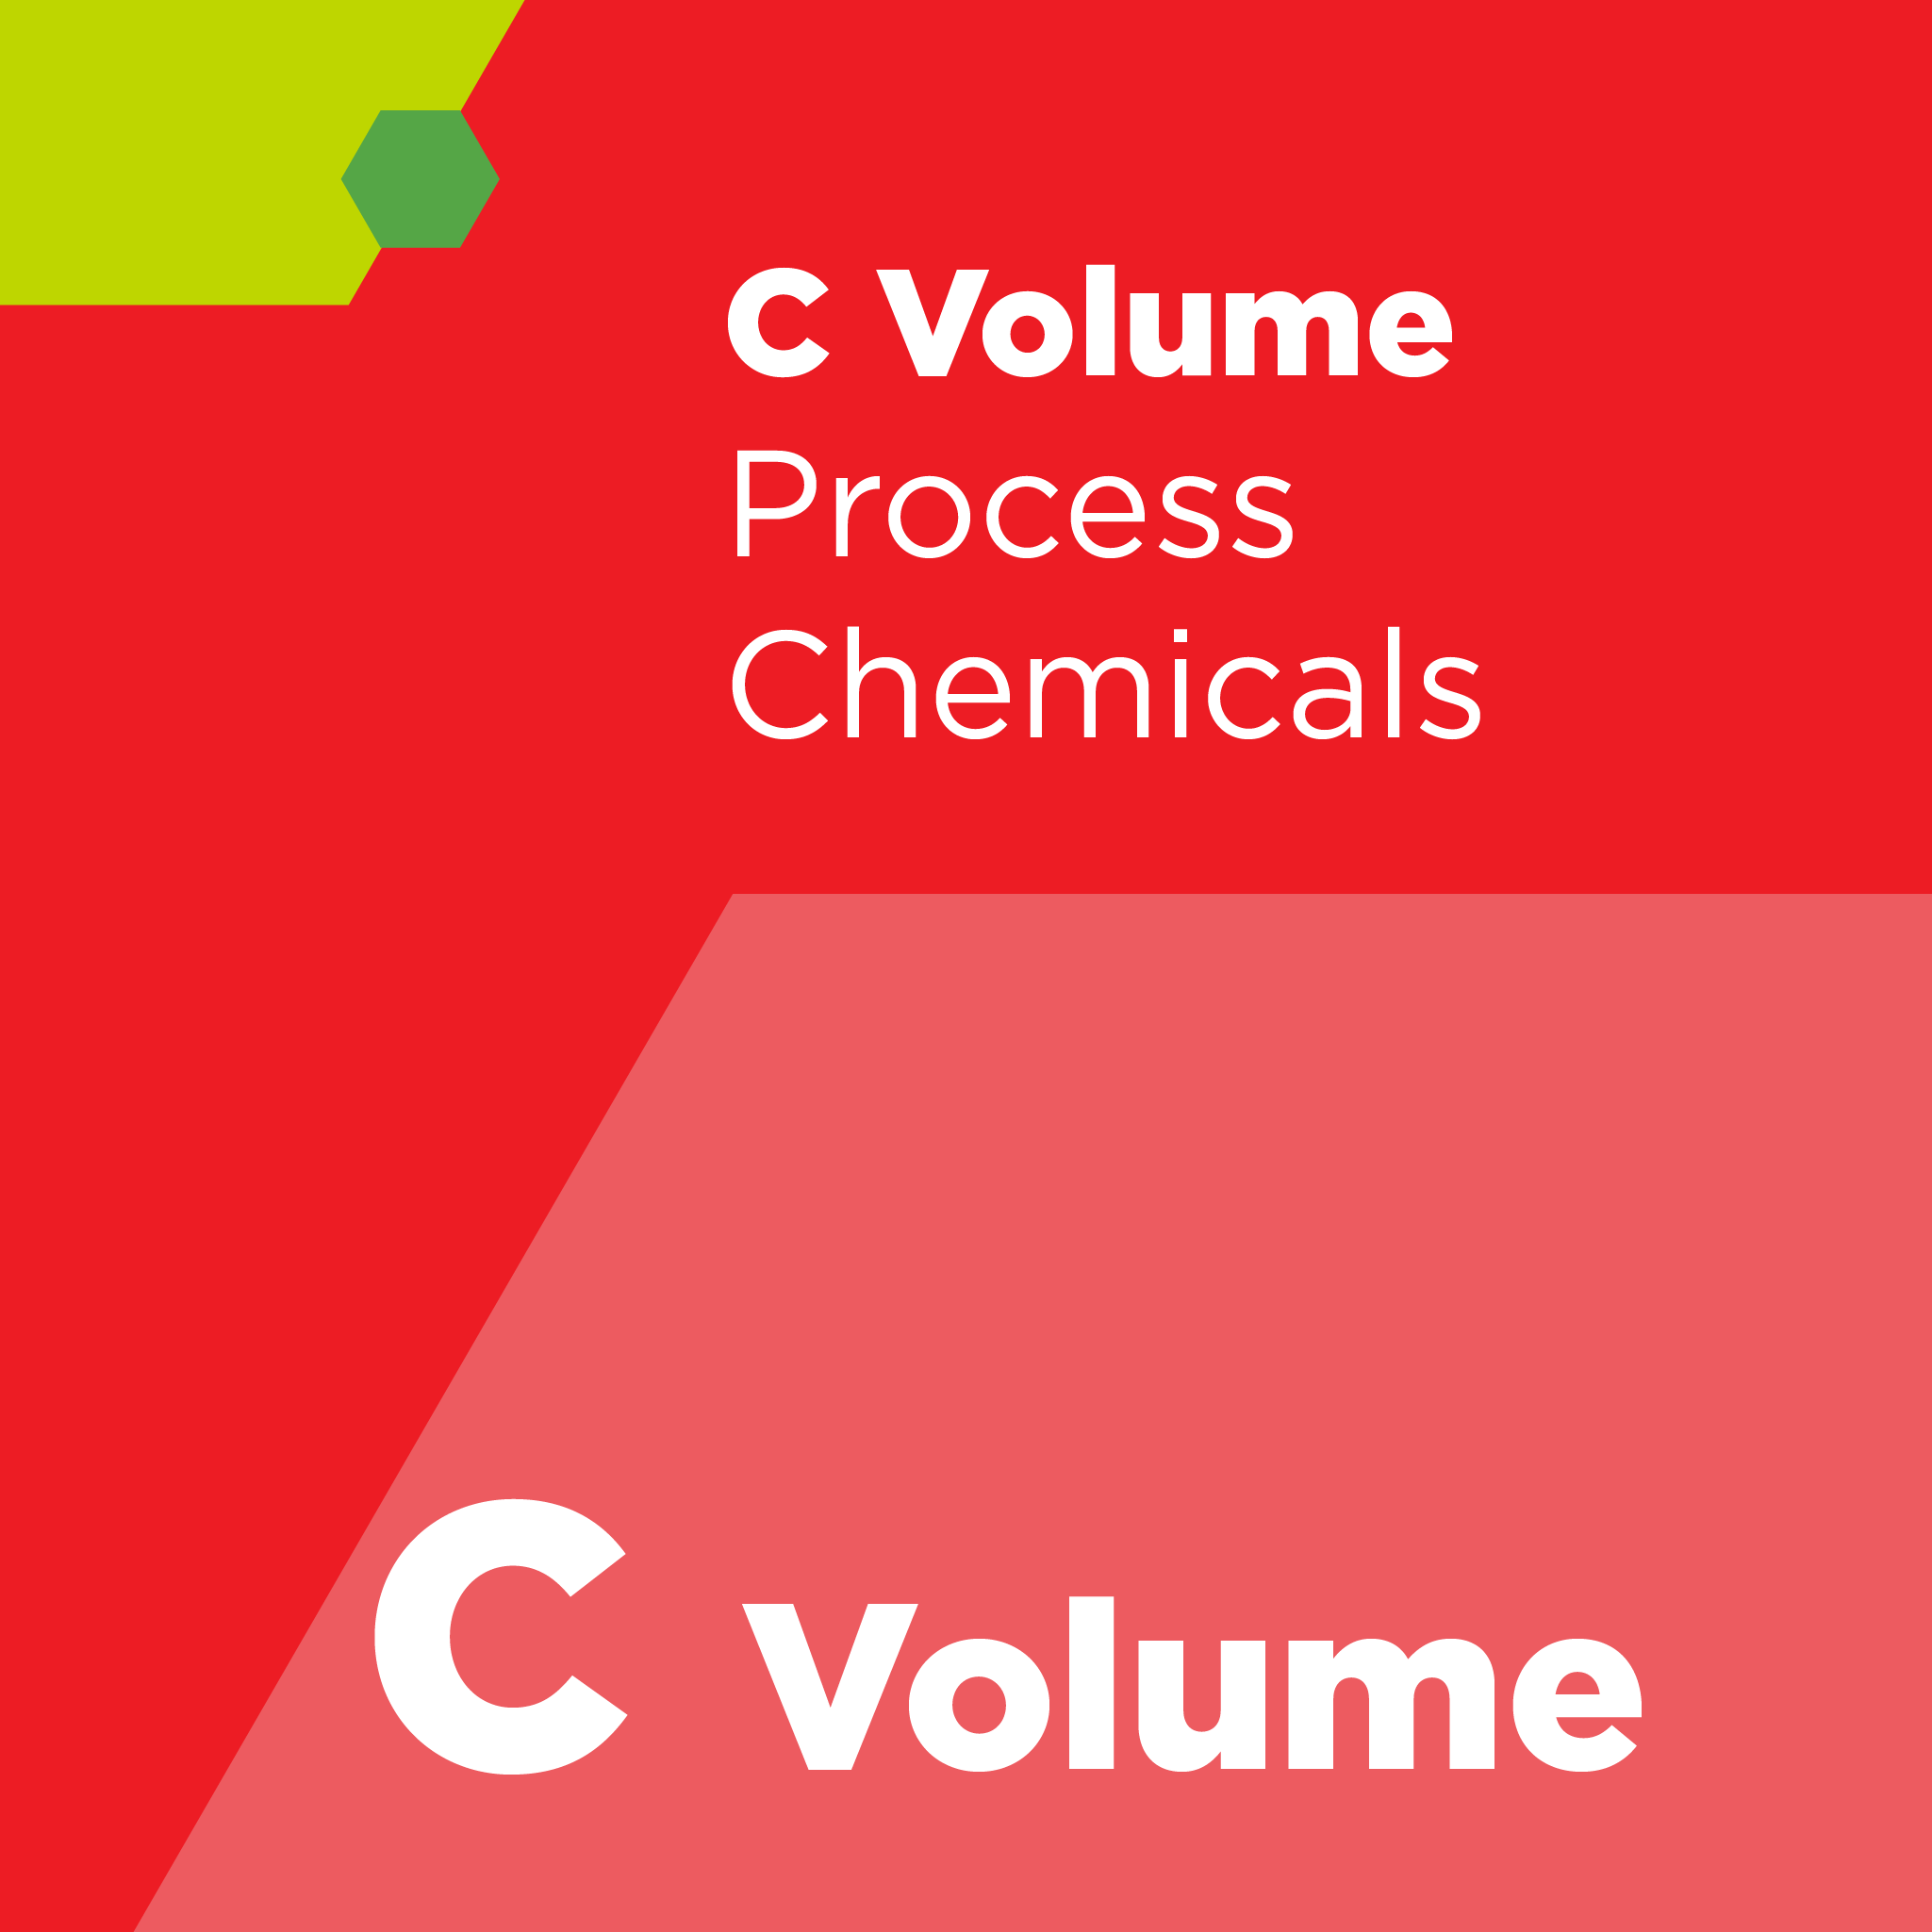 C02400 - SEMI C24 - Specification for n-Butyl Acetate